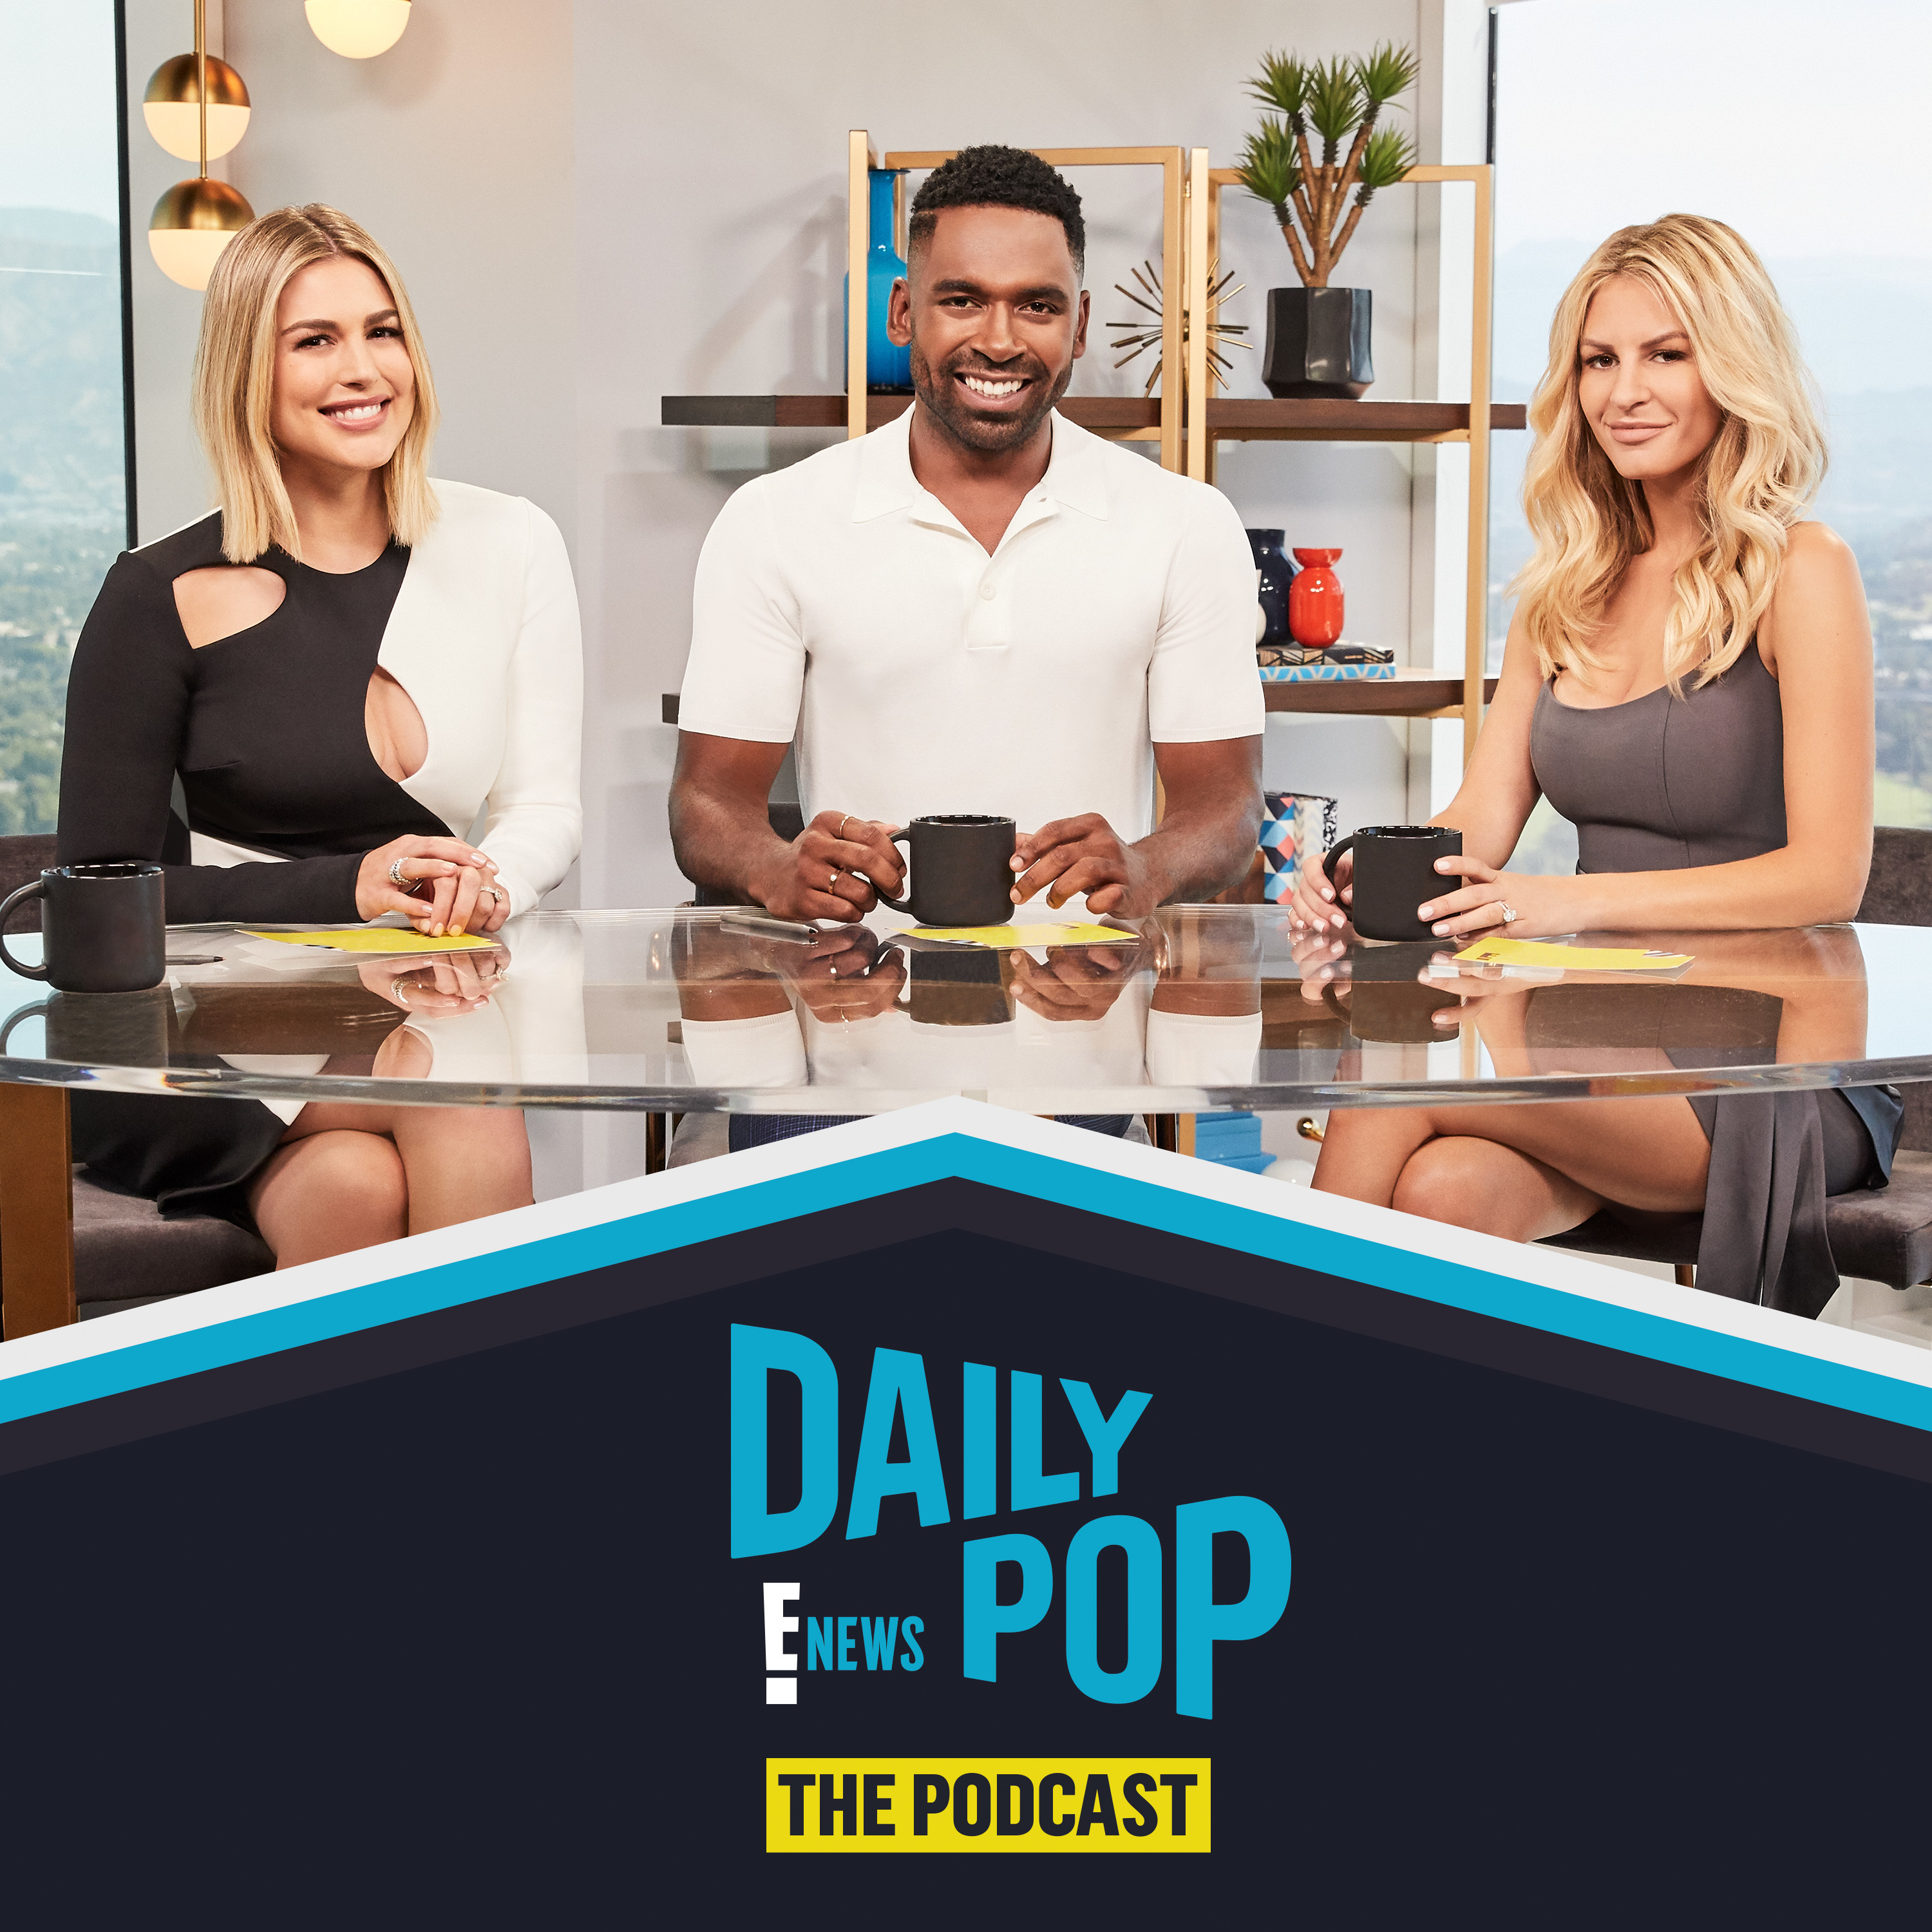 A highlight from Kanye West's SHADES Ex Kim Kardashian?, Jodie Sweetin Reacts to Police Shove - Daily Pop 06/27/22 